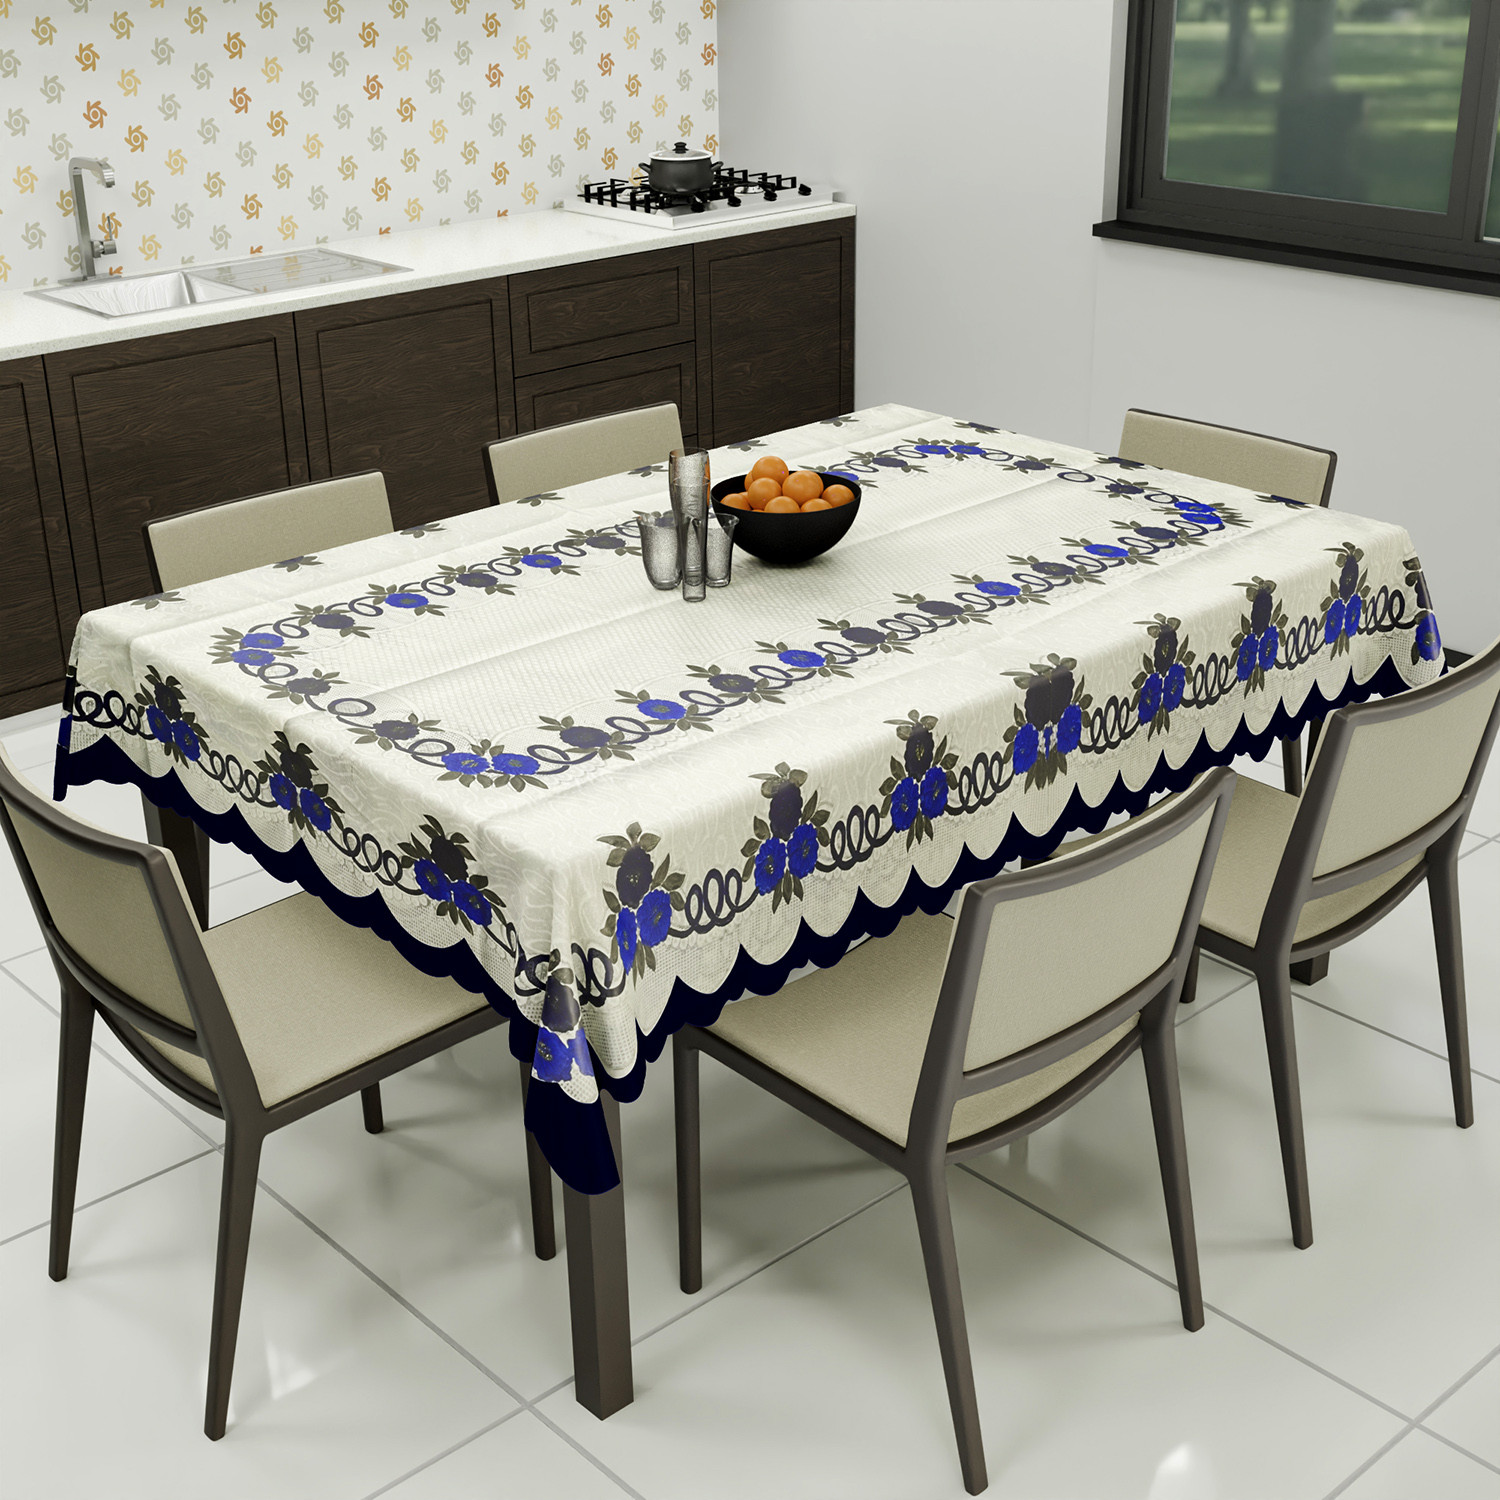 Kuber Industries Cotton Floral Print Waterproof Attractive Dining Table Cover|Tablecloth for Home Decorative, 60x90 Inch (Cream Blue)